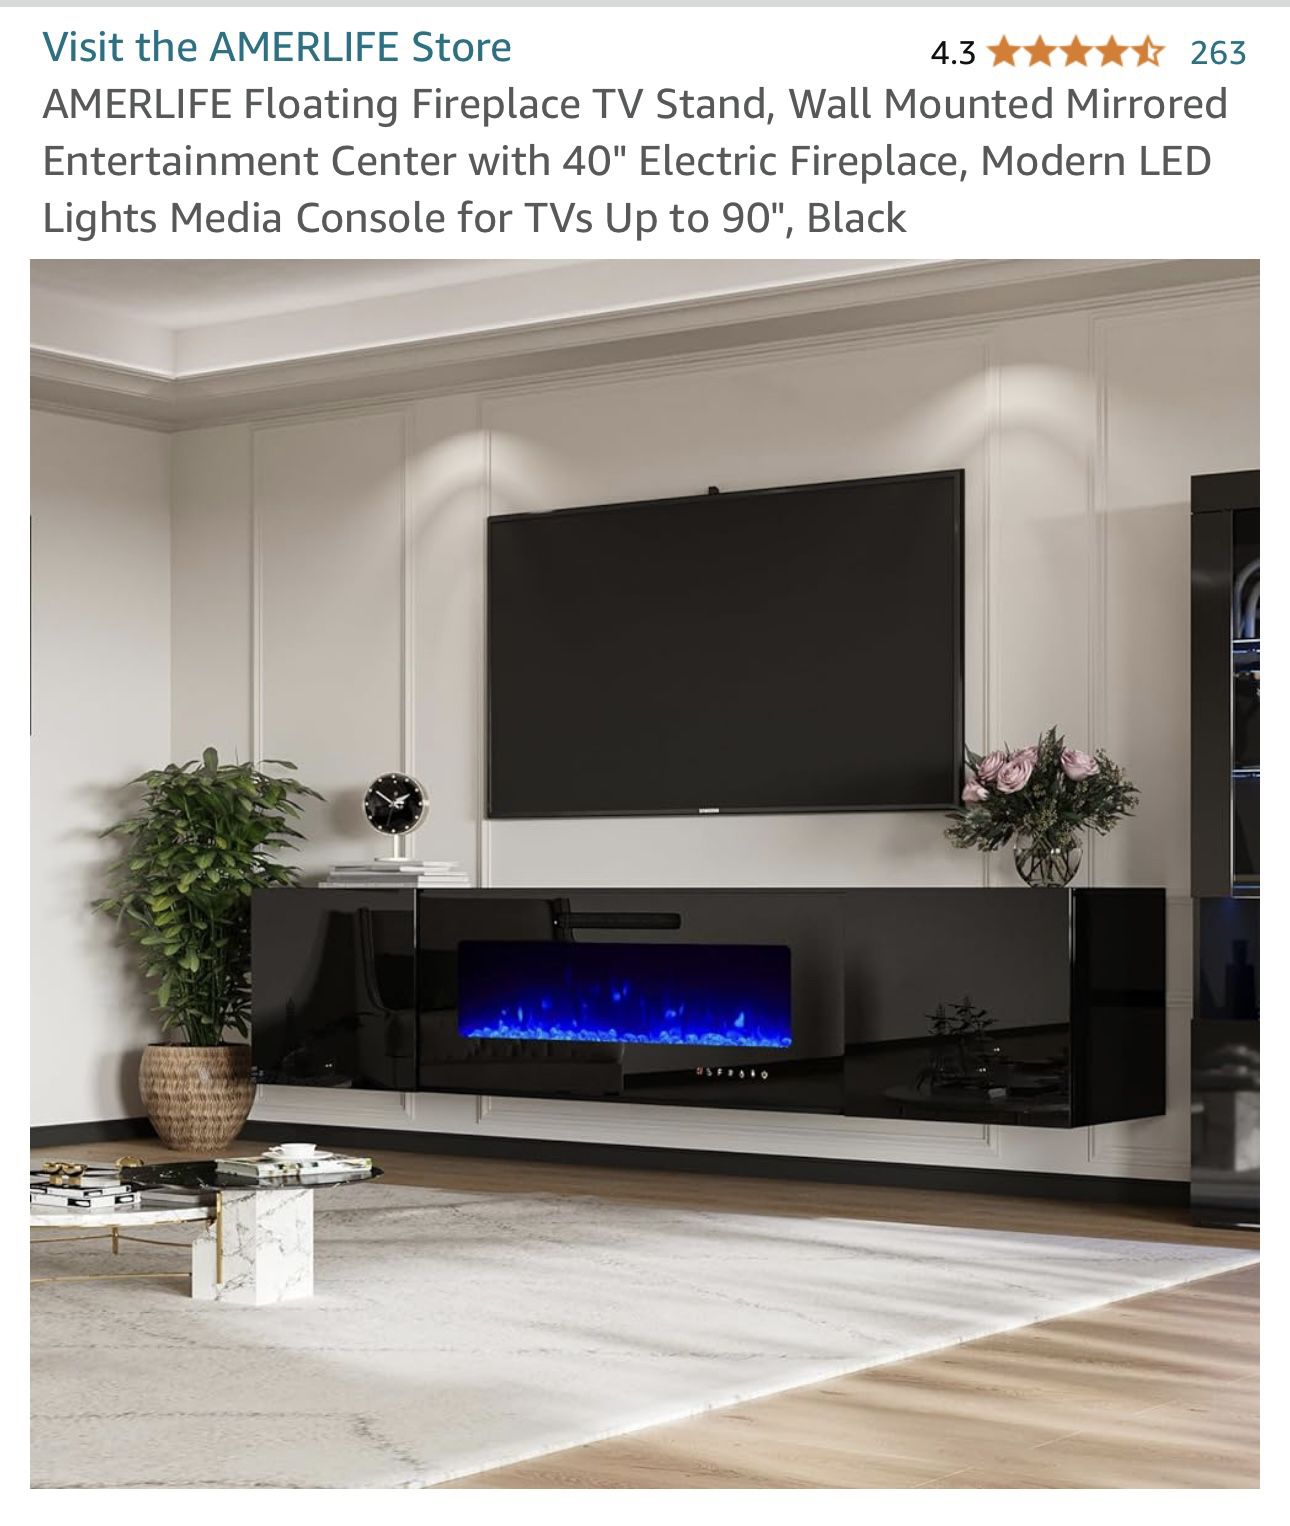 AMERLIFE Floating Fireplace TV Stand